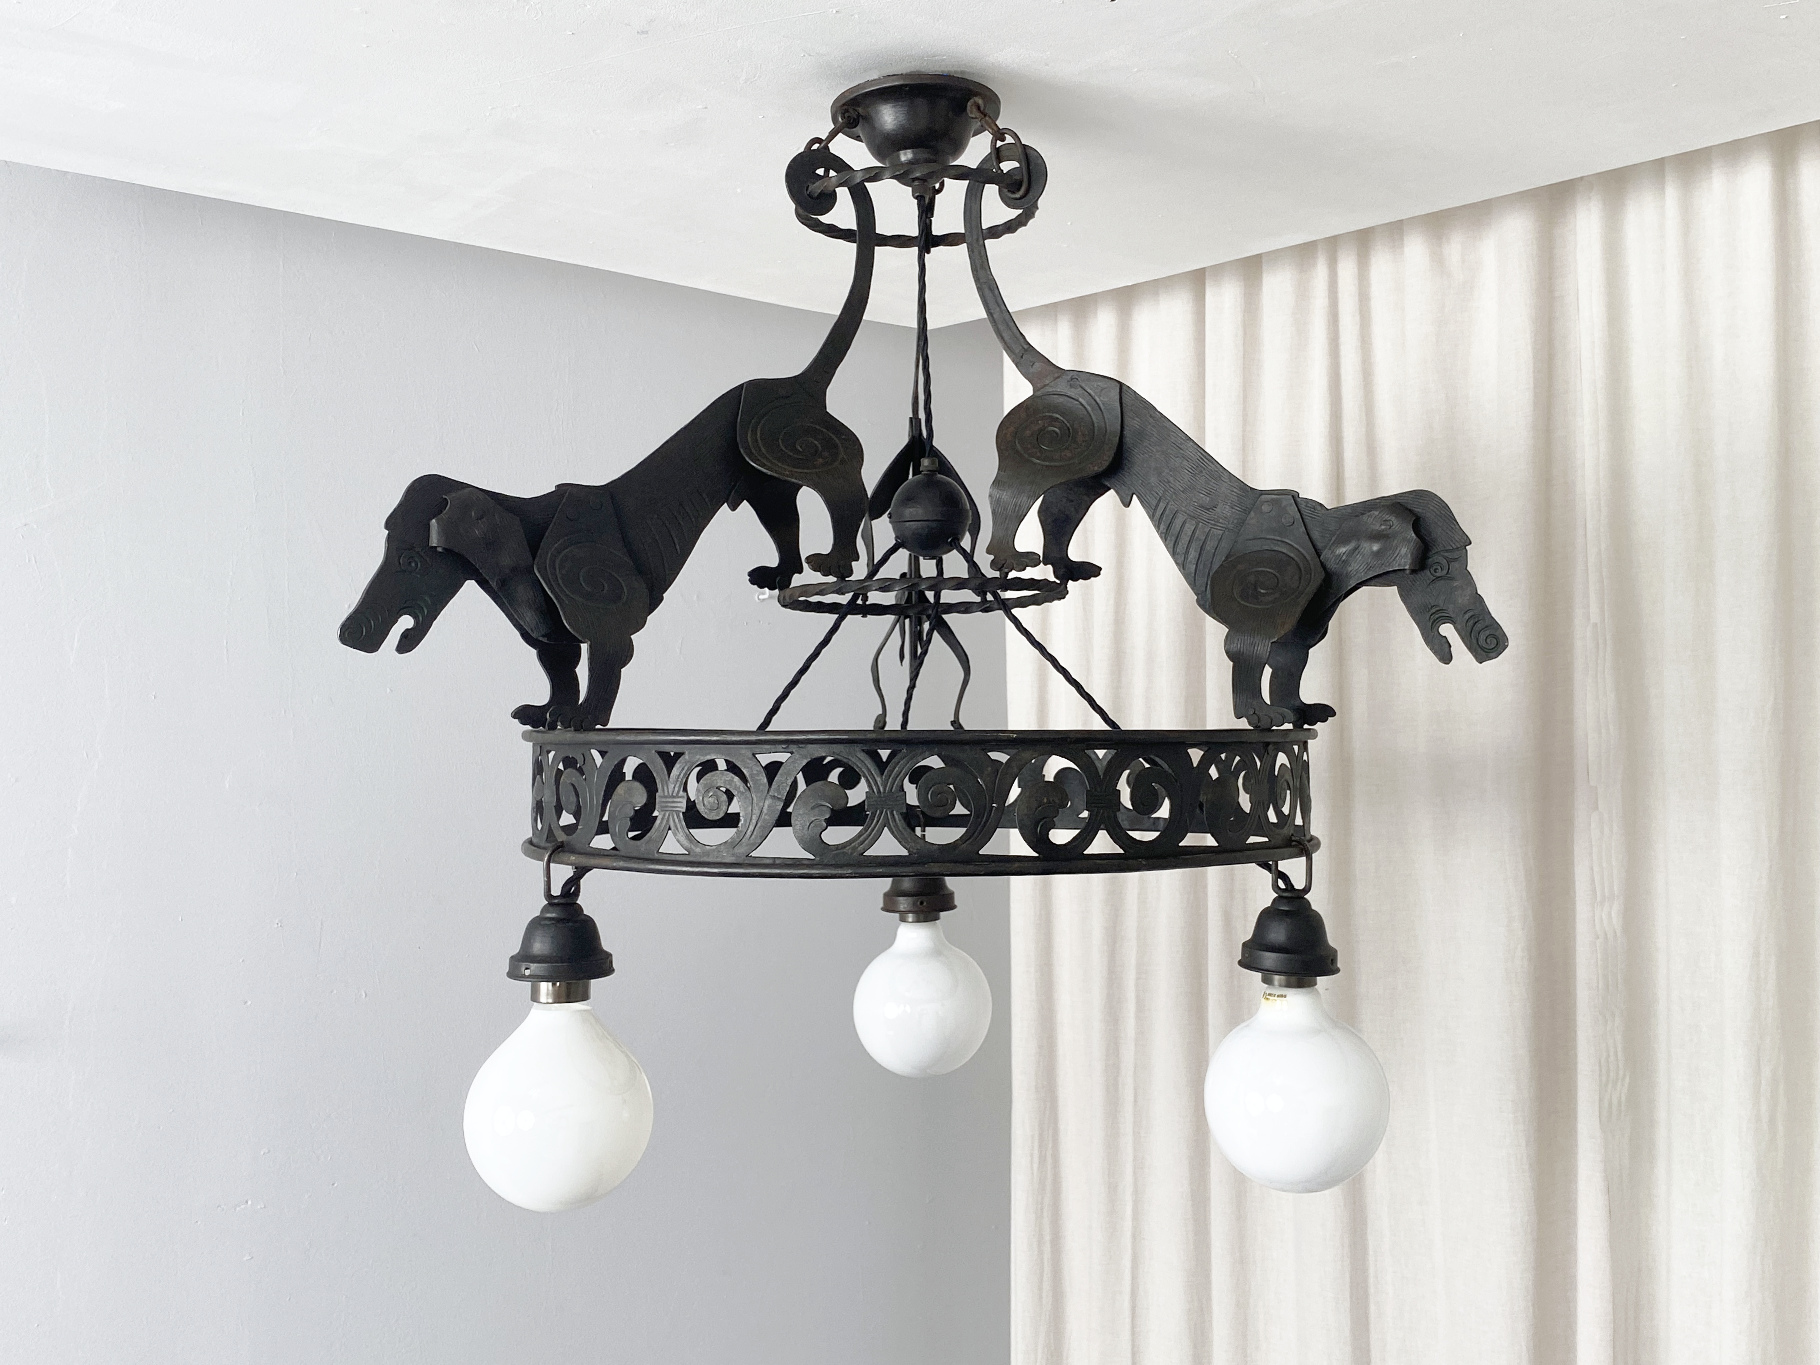 Ceiling Lamp / Chandelier Dachshund, Art Nouveau, Wrought Iron by Hugo Berger for Goberg, Germany, ca 1900